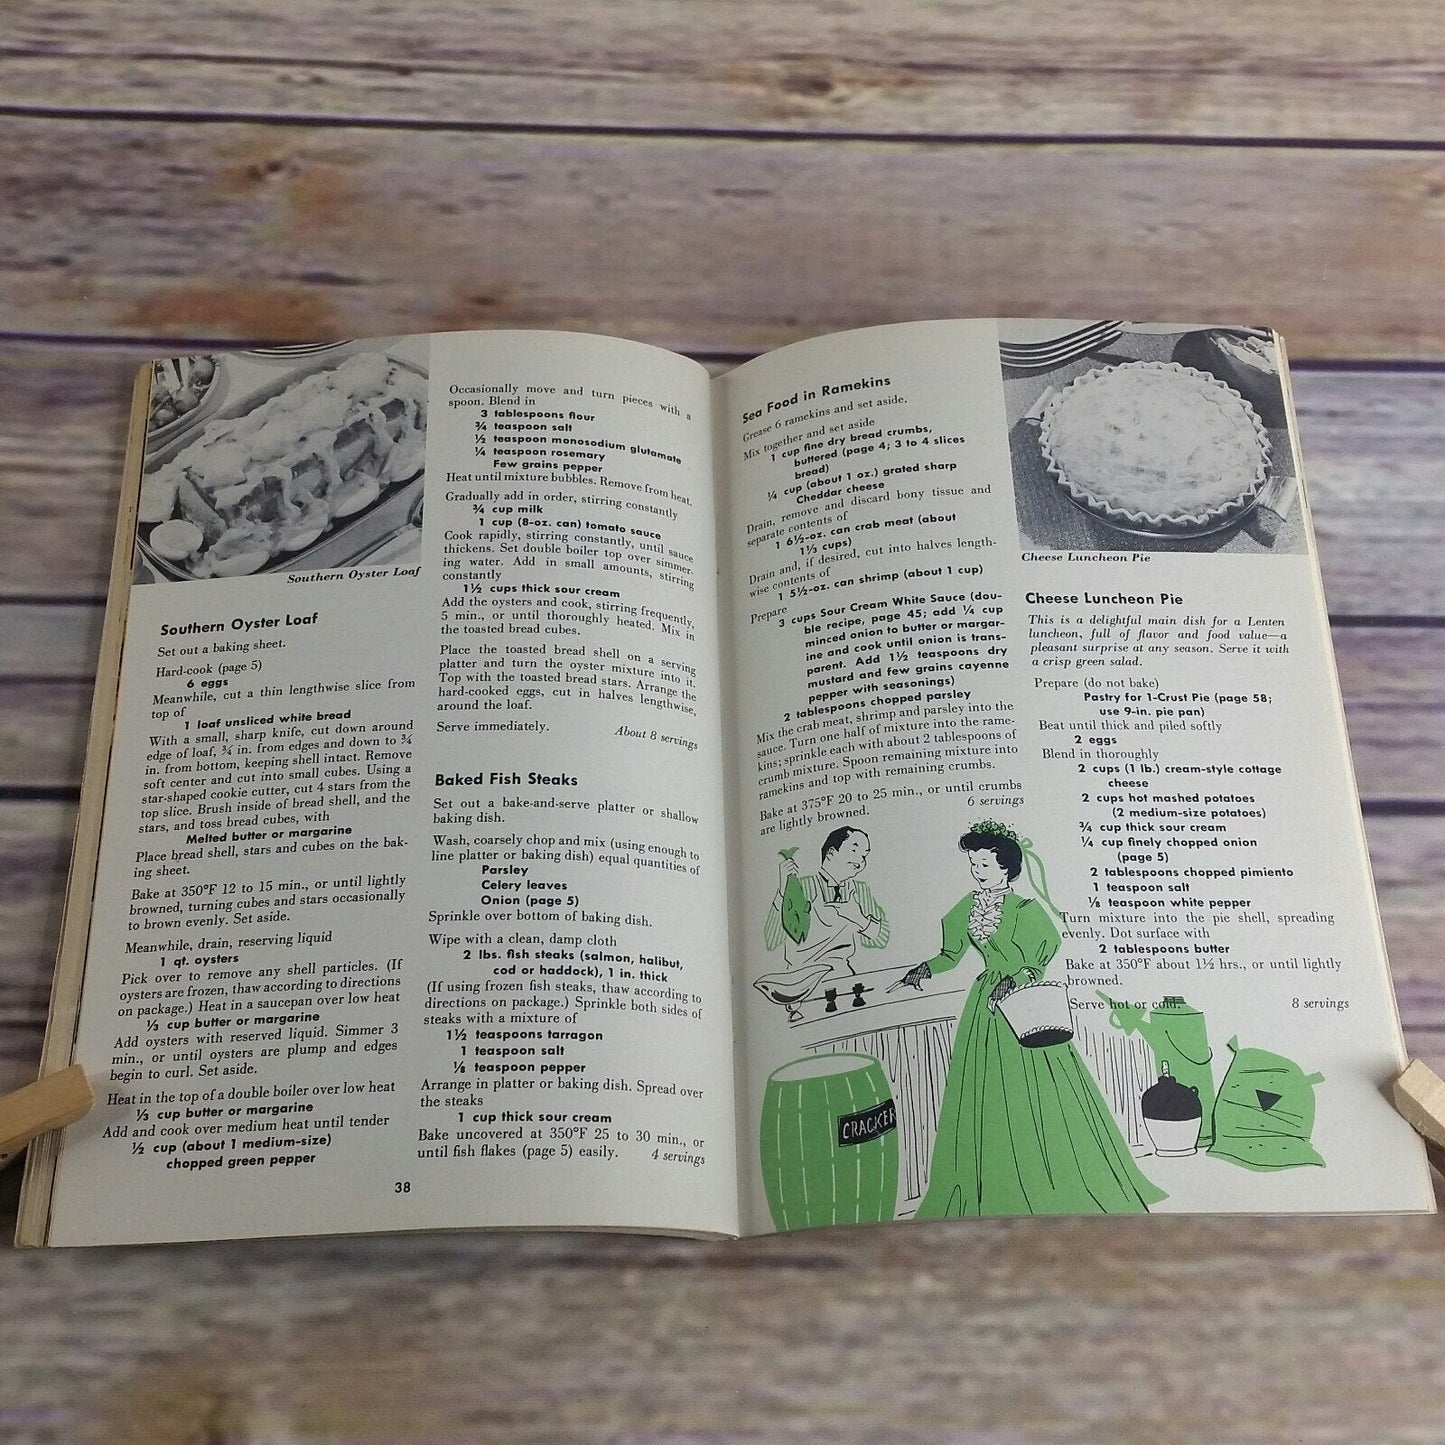 Vtg Culinary Arts Institute Cookbook Cooking WithSour Cream and Buttermilk 161 Recipes 1956 Booklet